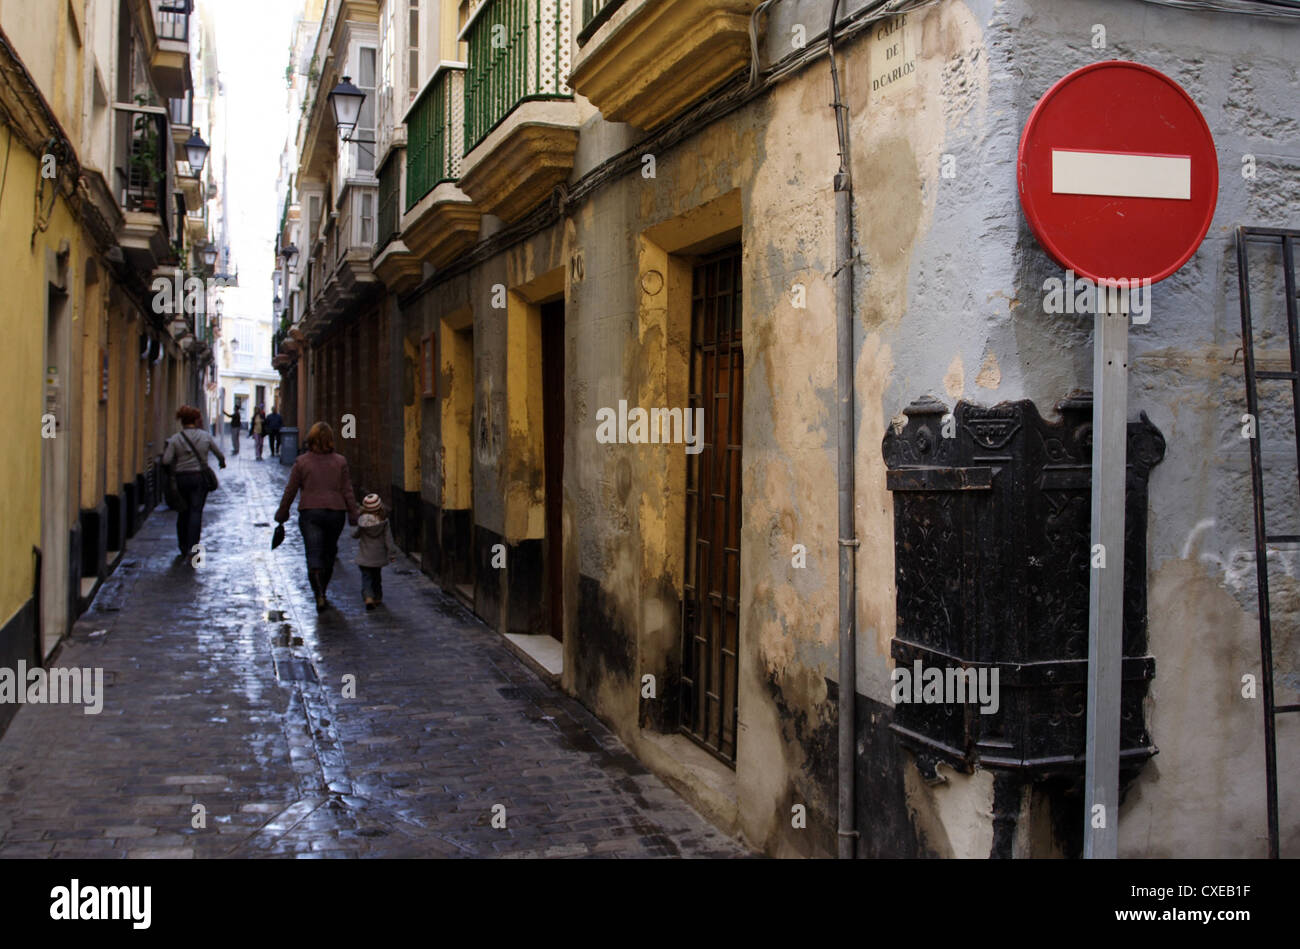 Cadiz, prohibiting the entrance to an alley Stock Photo